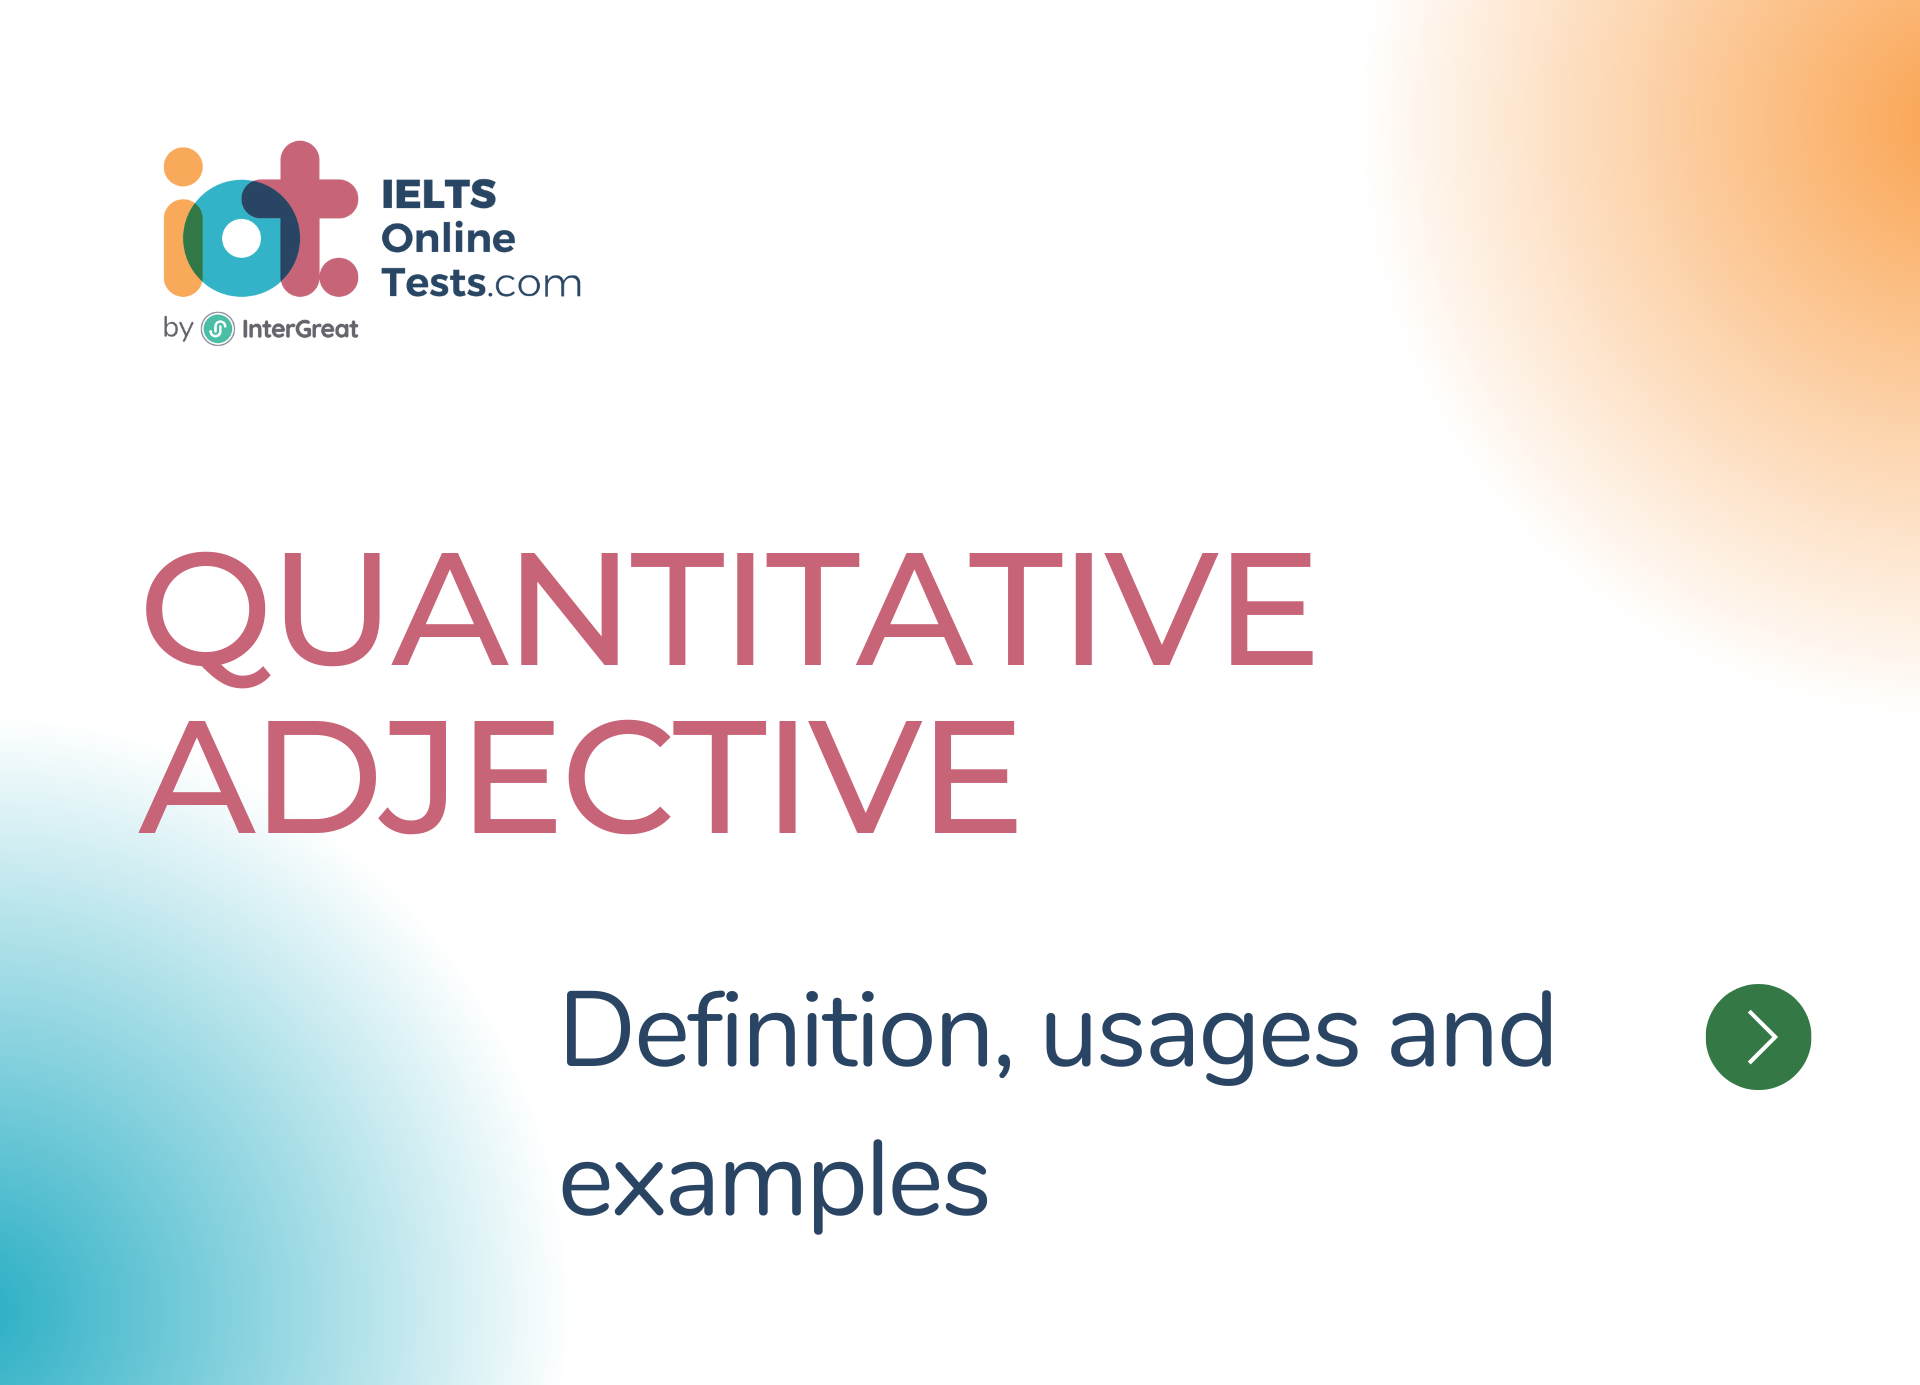 Quantitative Adjective definition, usages and examples